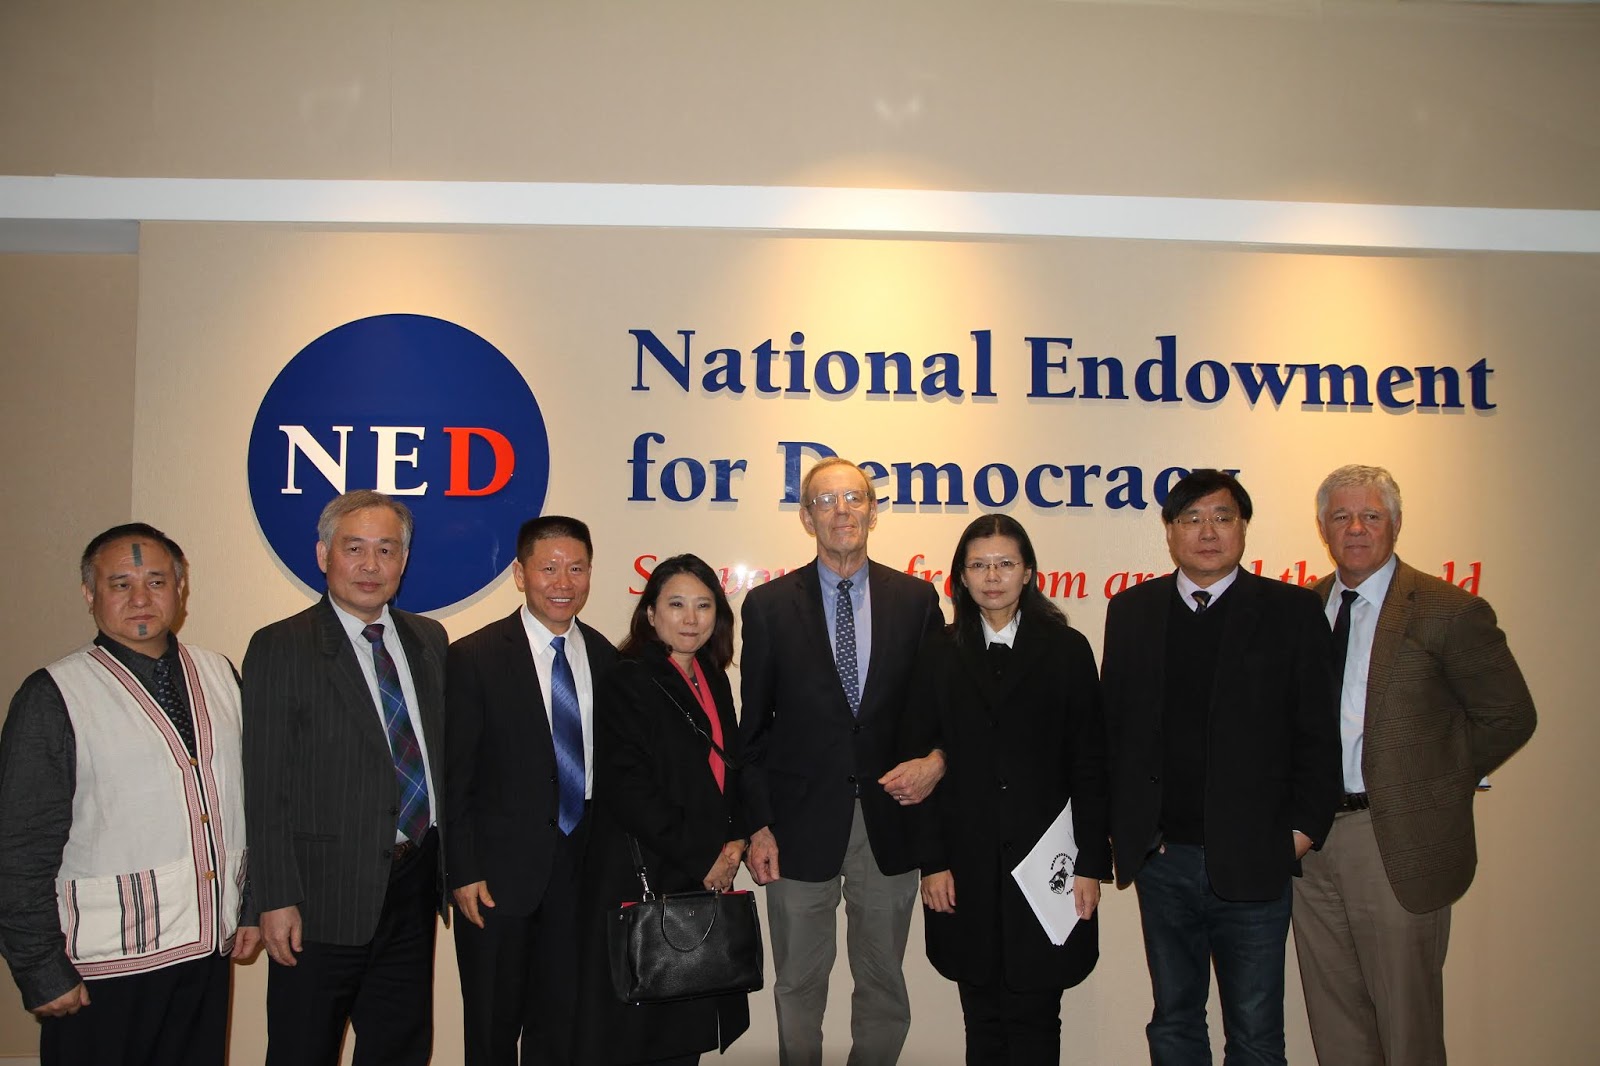 ChinaAid: National Endowment for Democracy announces Democracy Award  ceremony